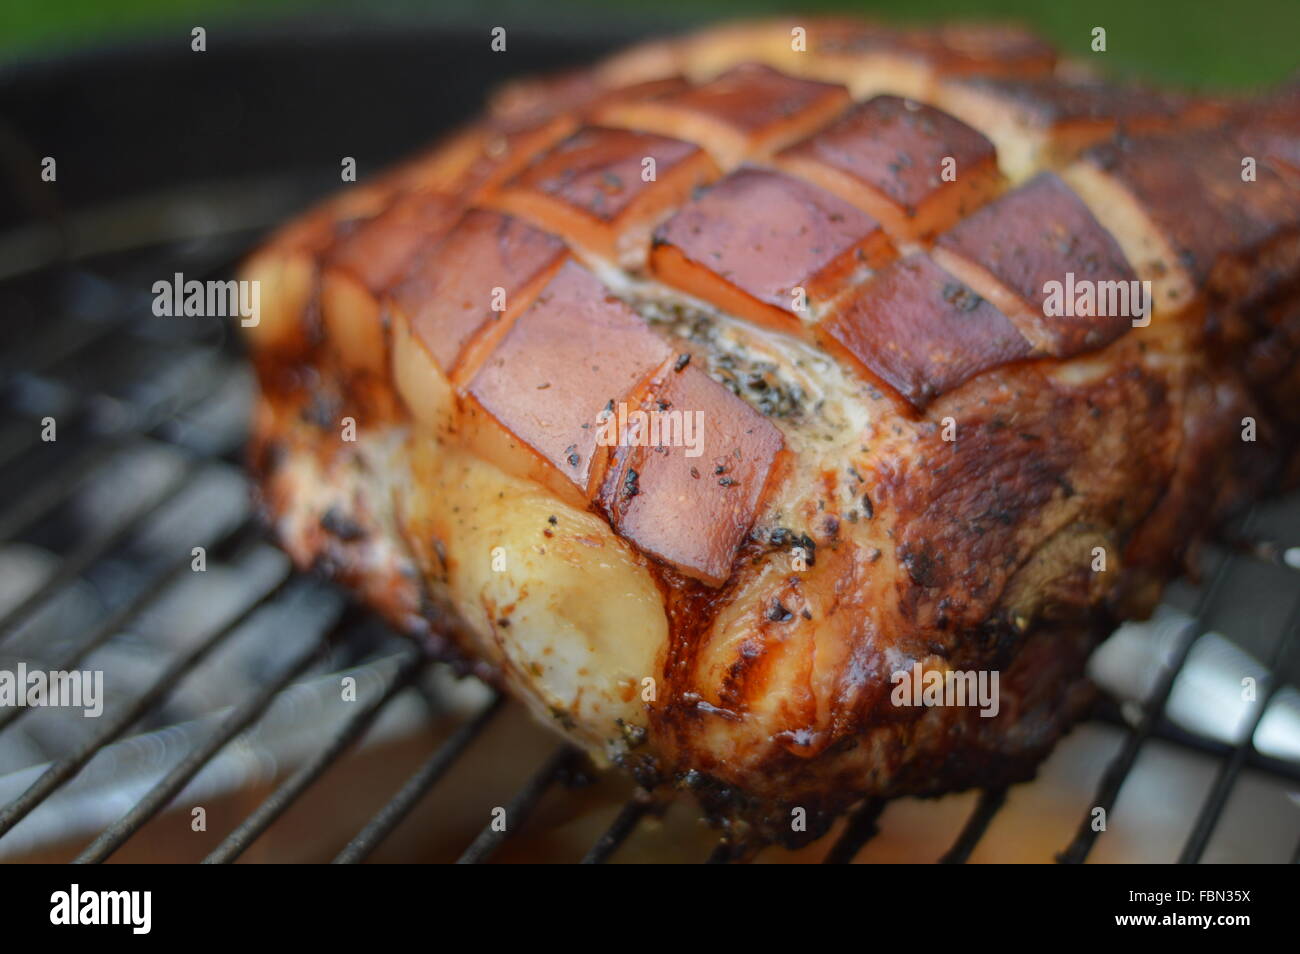 Grilled Meat Stock Photo